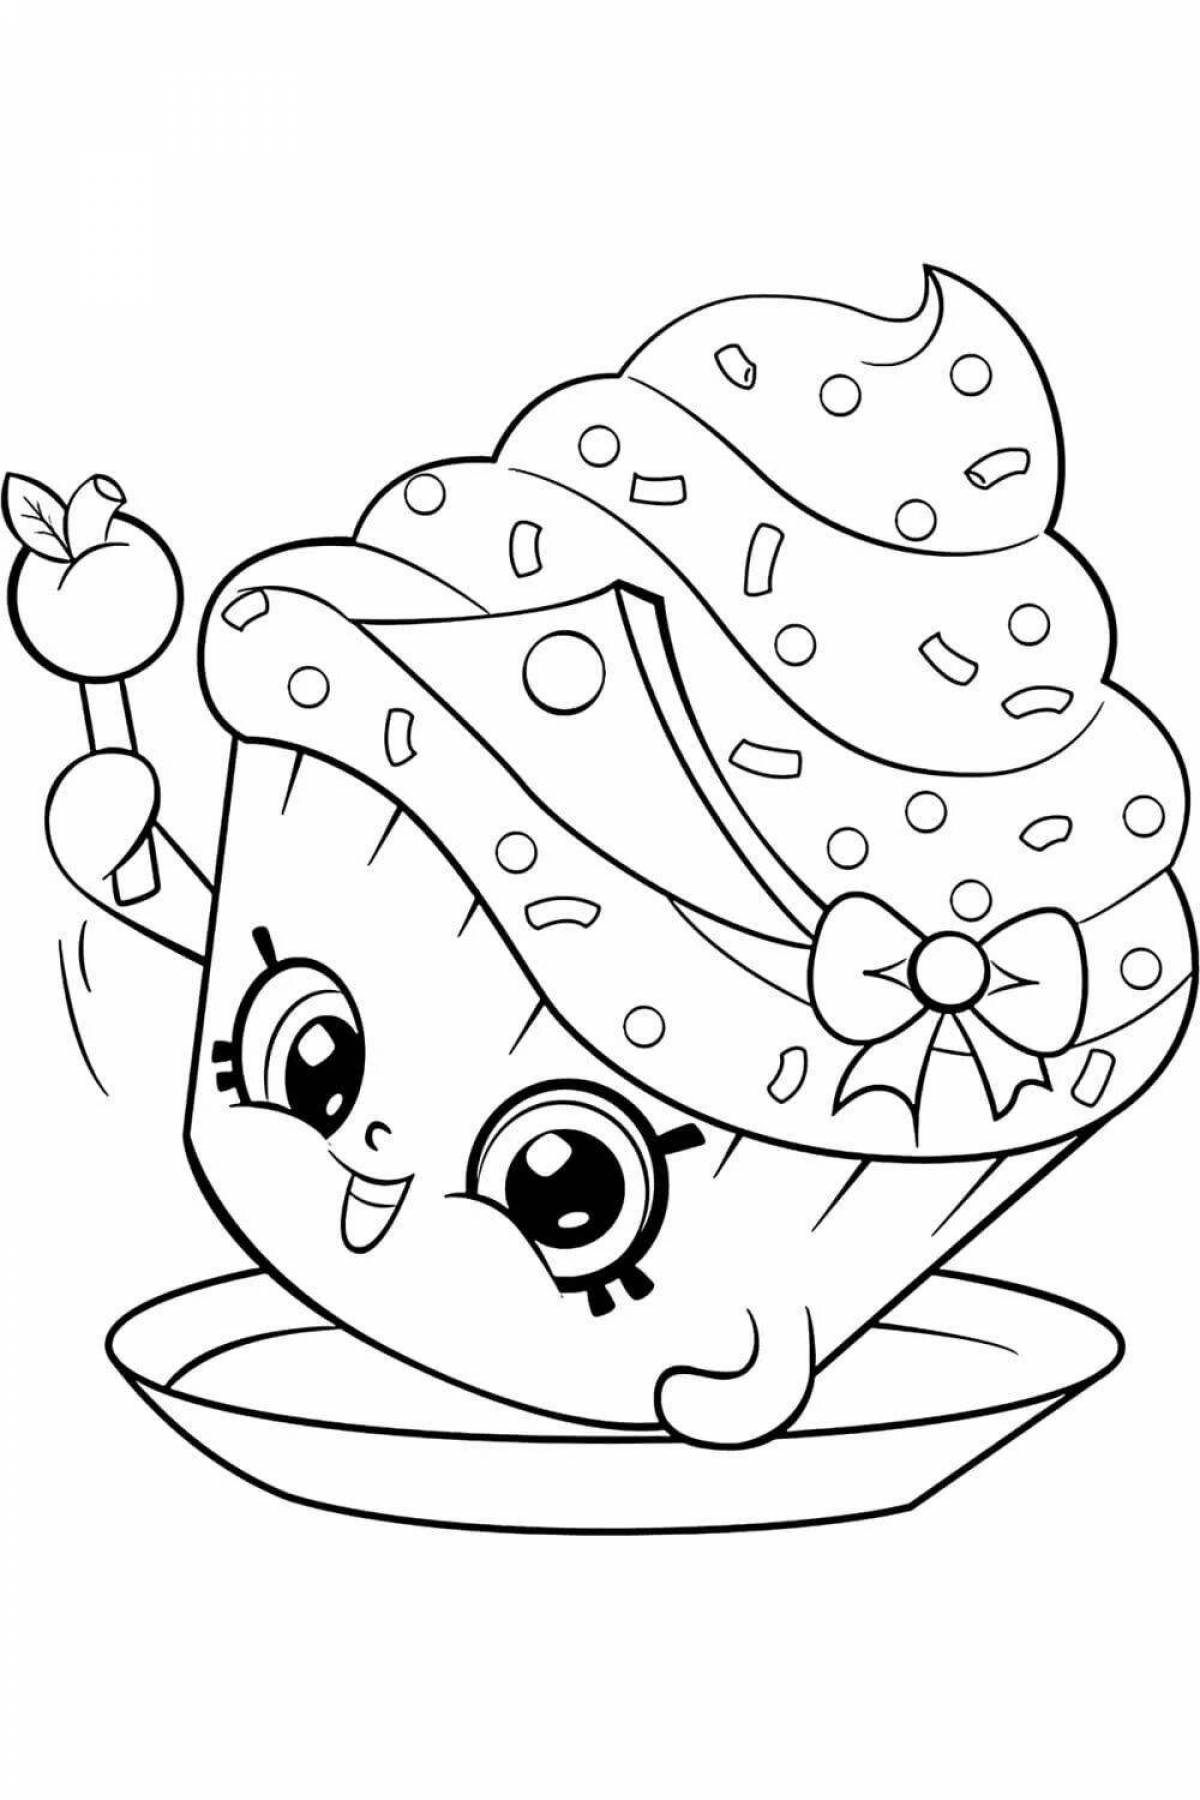 Amazing shopinks coloring page